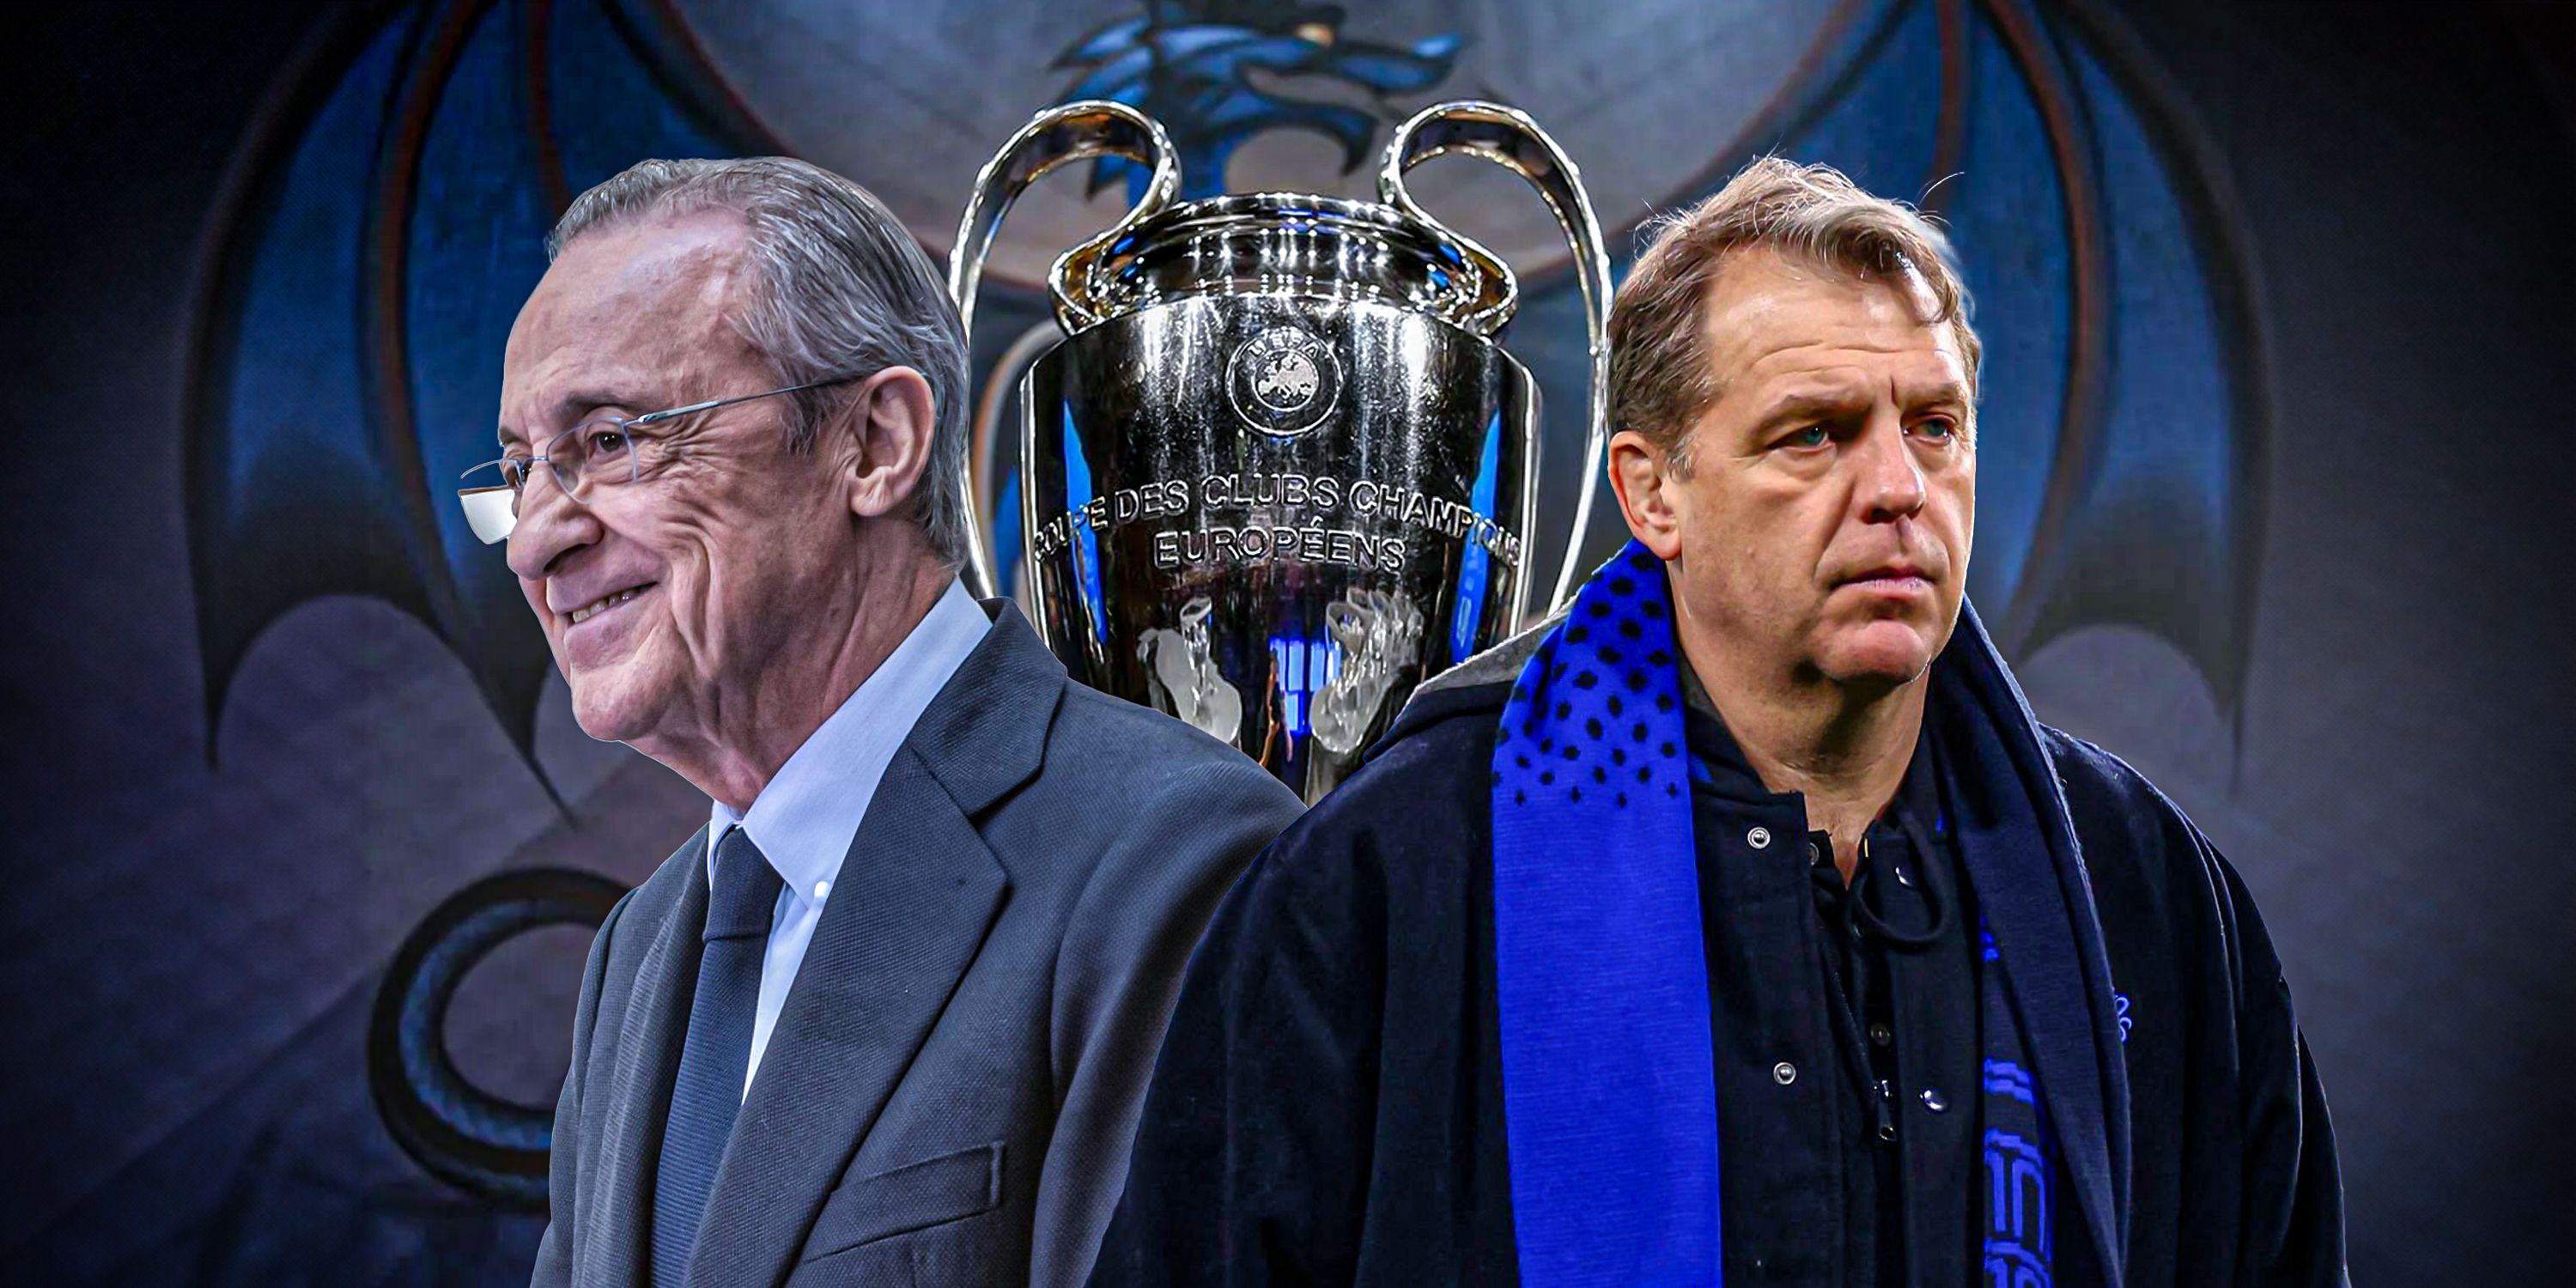 Florentino Perez, Todd Boehly and the Champions League trophy